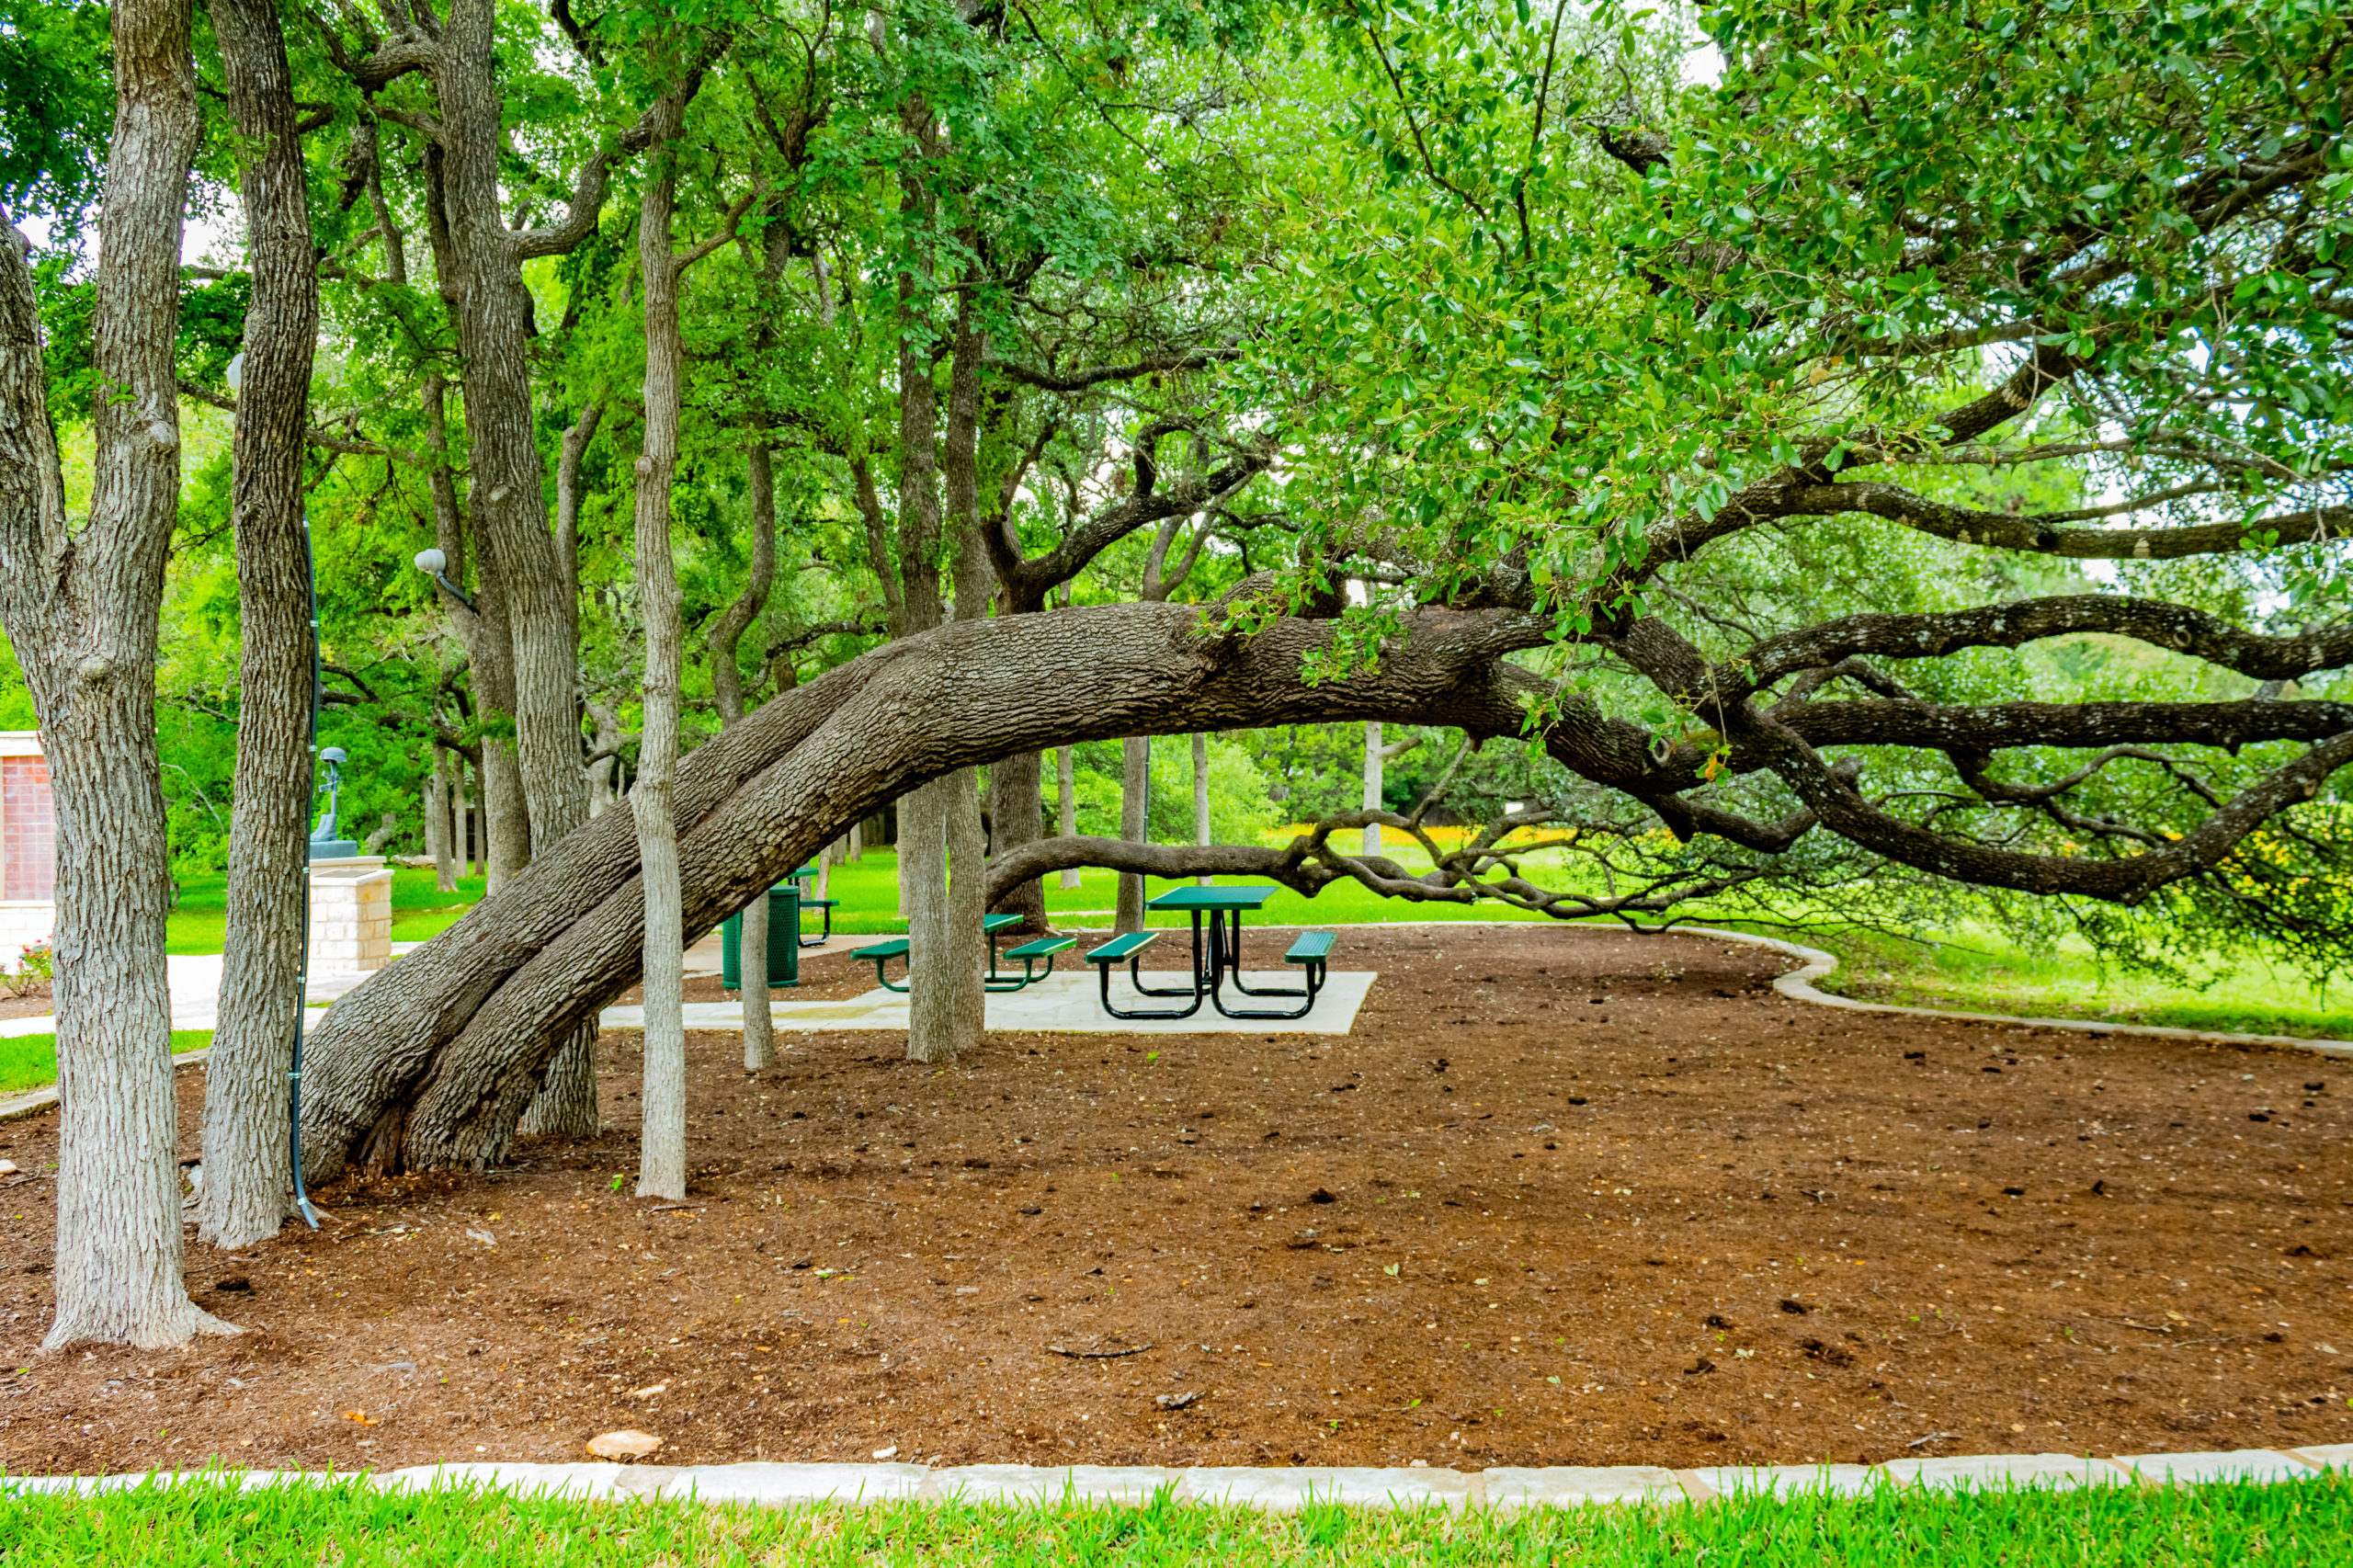 Picture of a picnic area with trees growing sideways.